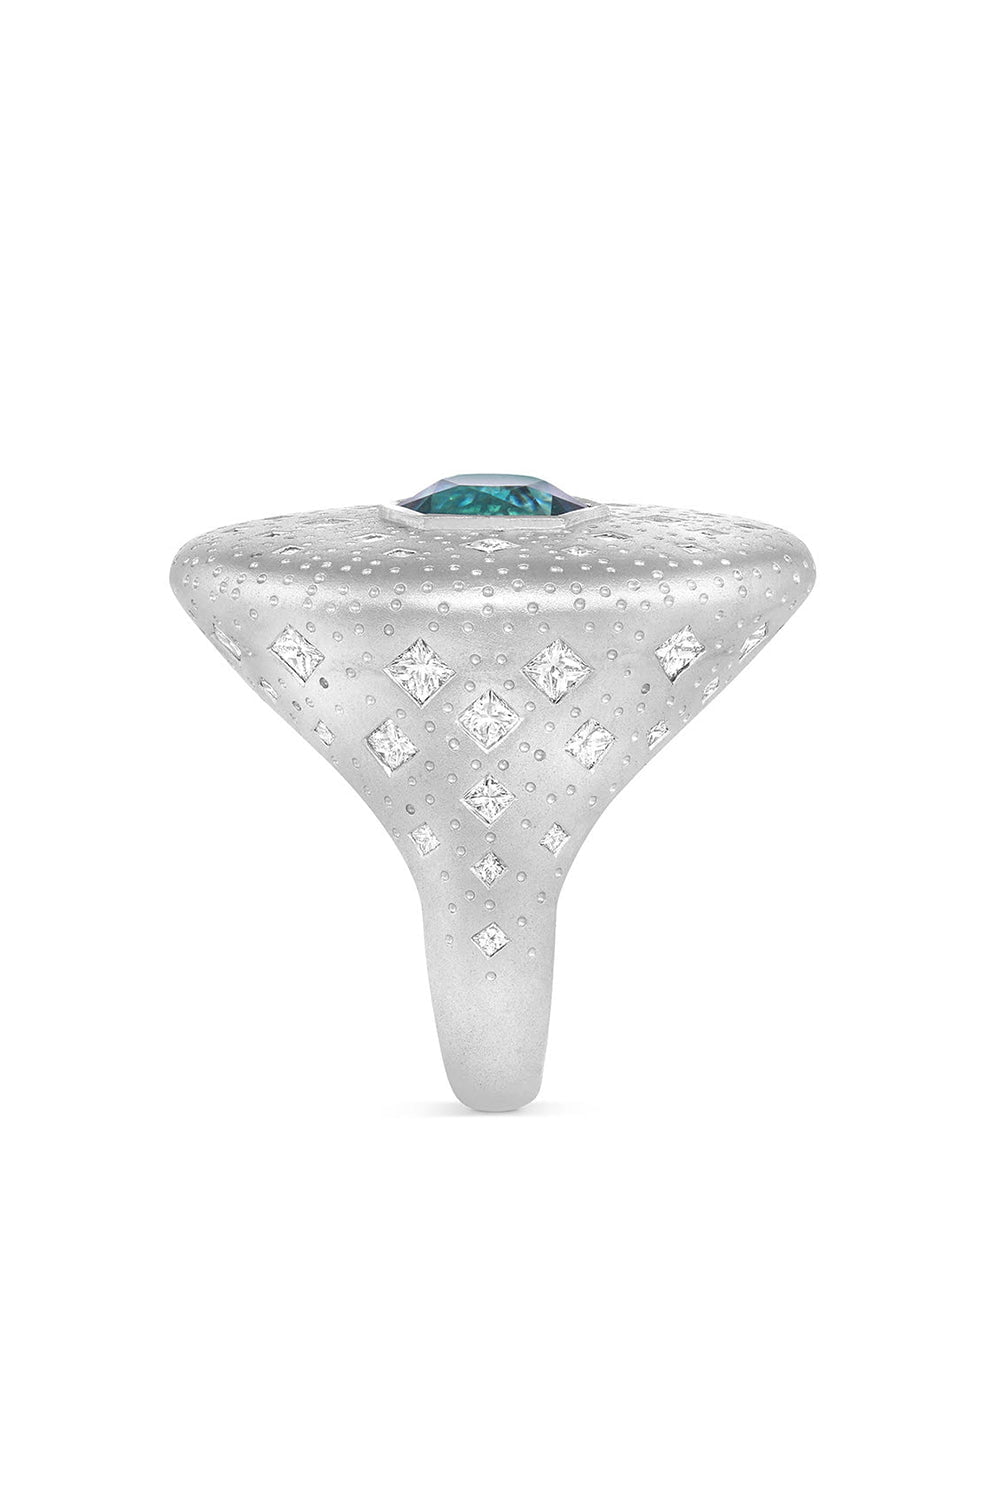 MEREDITH YOUNG-Chaos Tourmaline Diamond Ring-WHITE GOLD